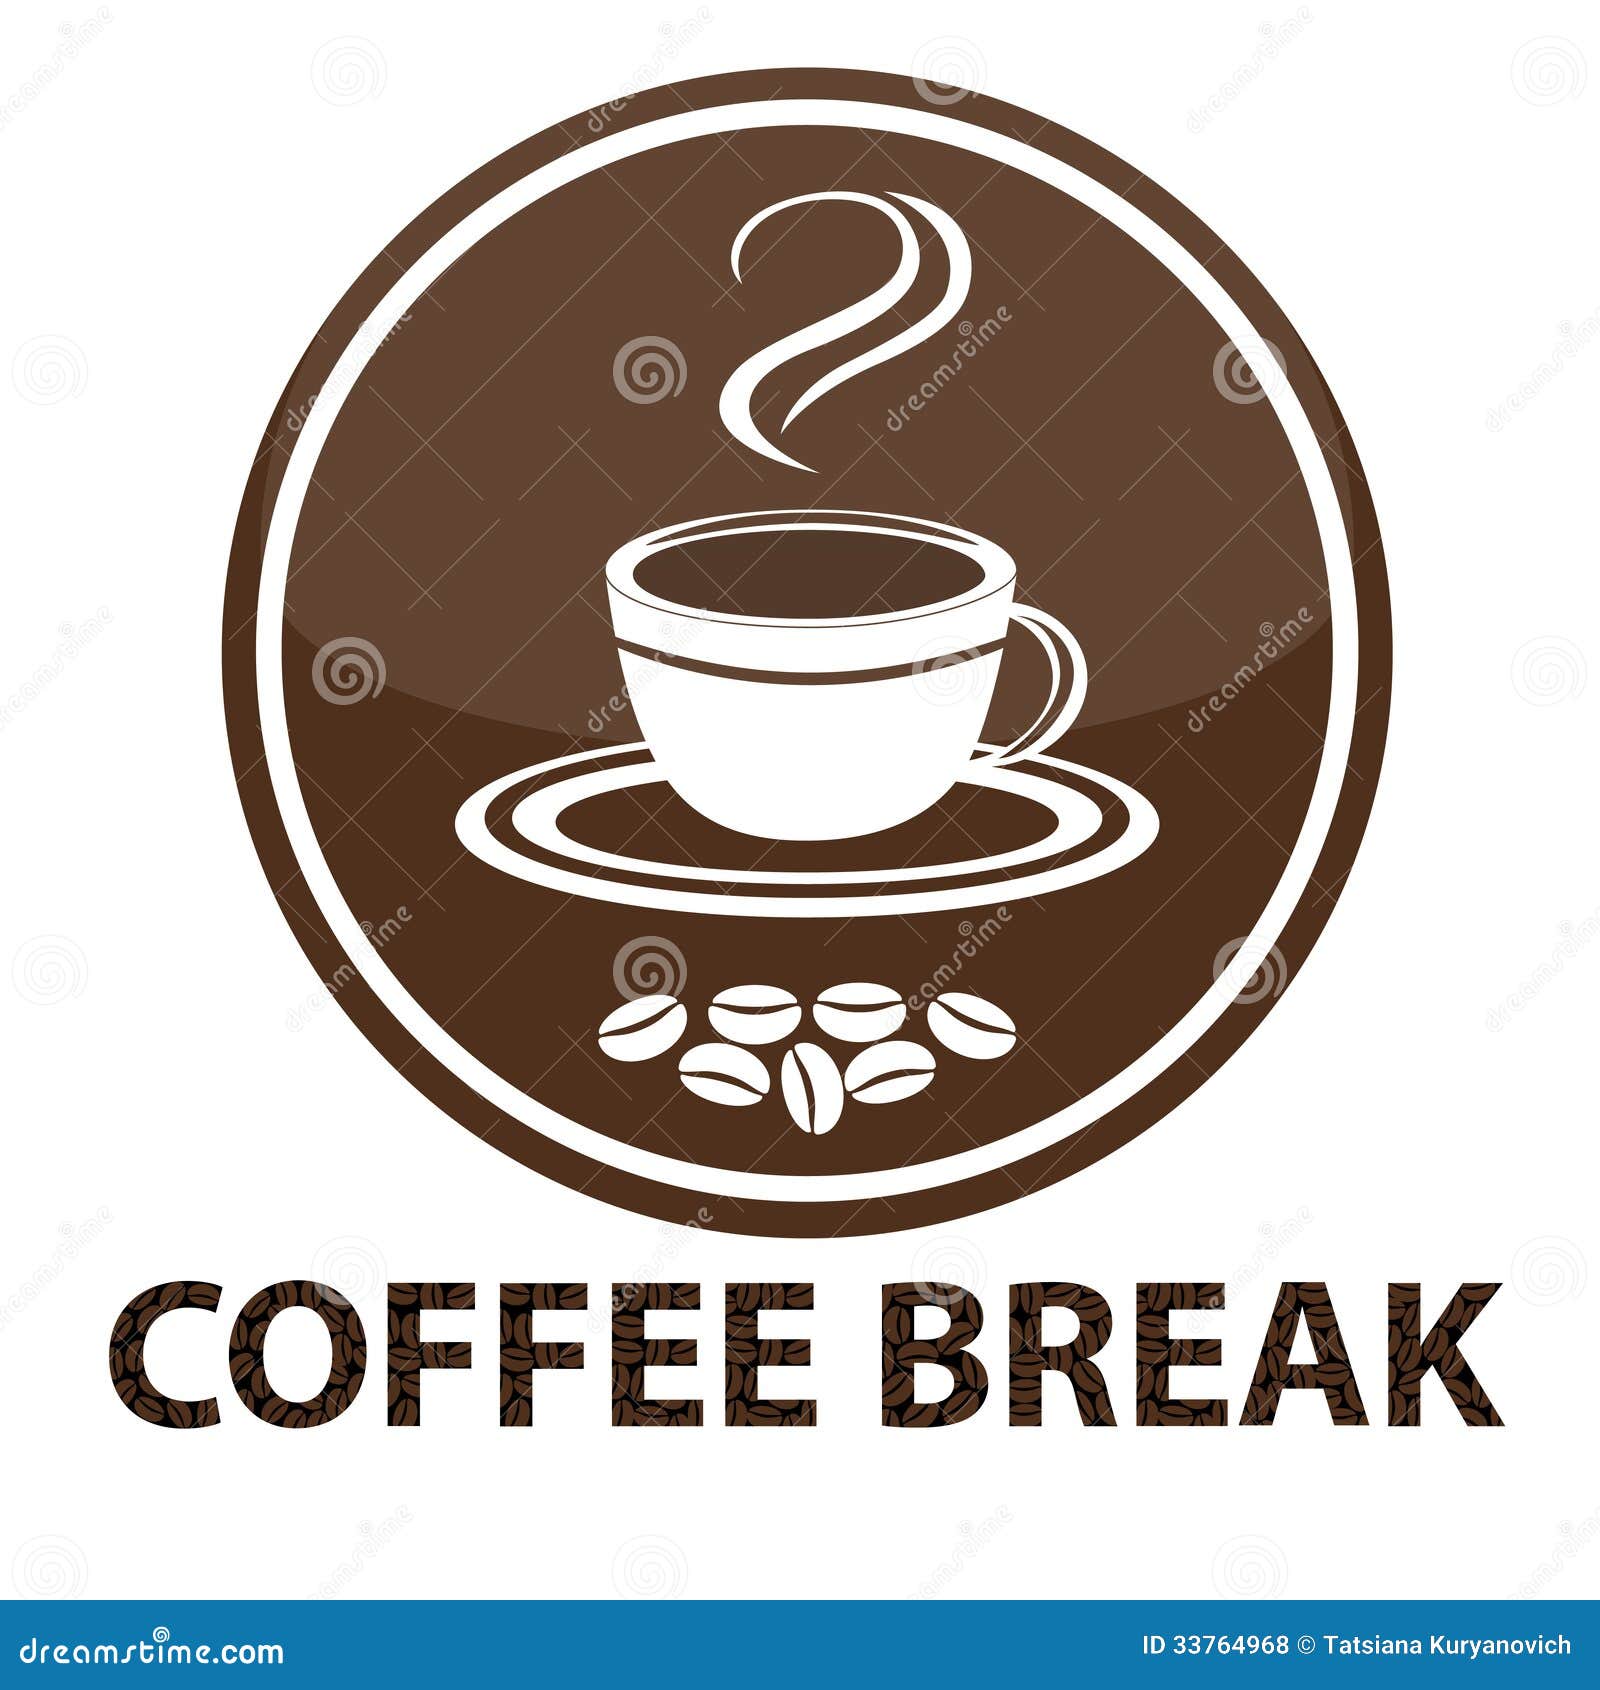 Background with coffee cup stock vector. Illustration of sign - 33764968